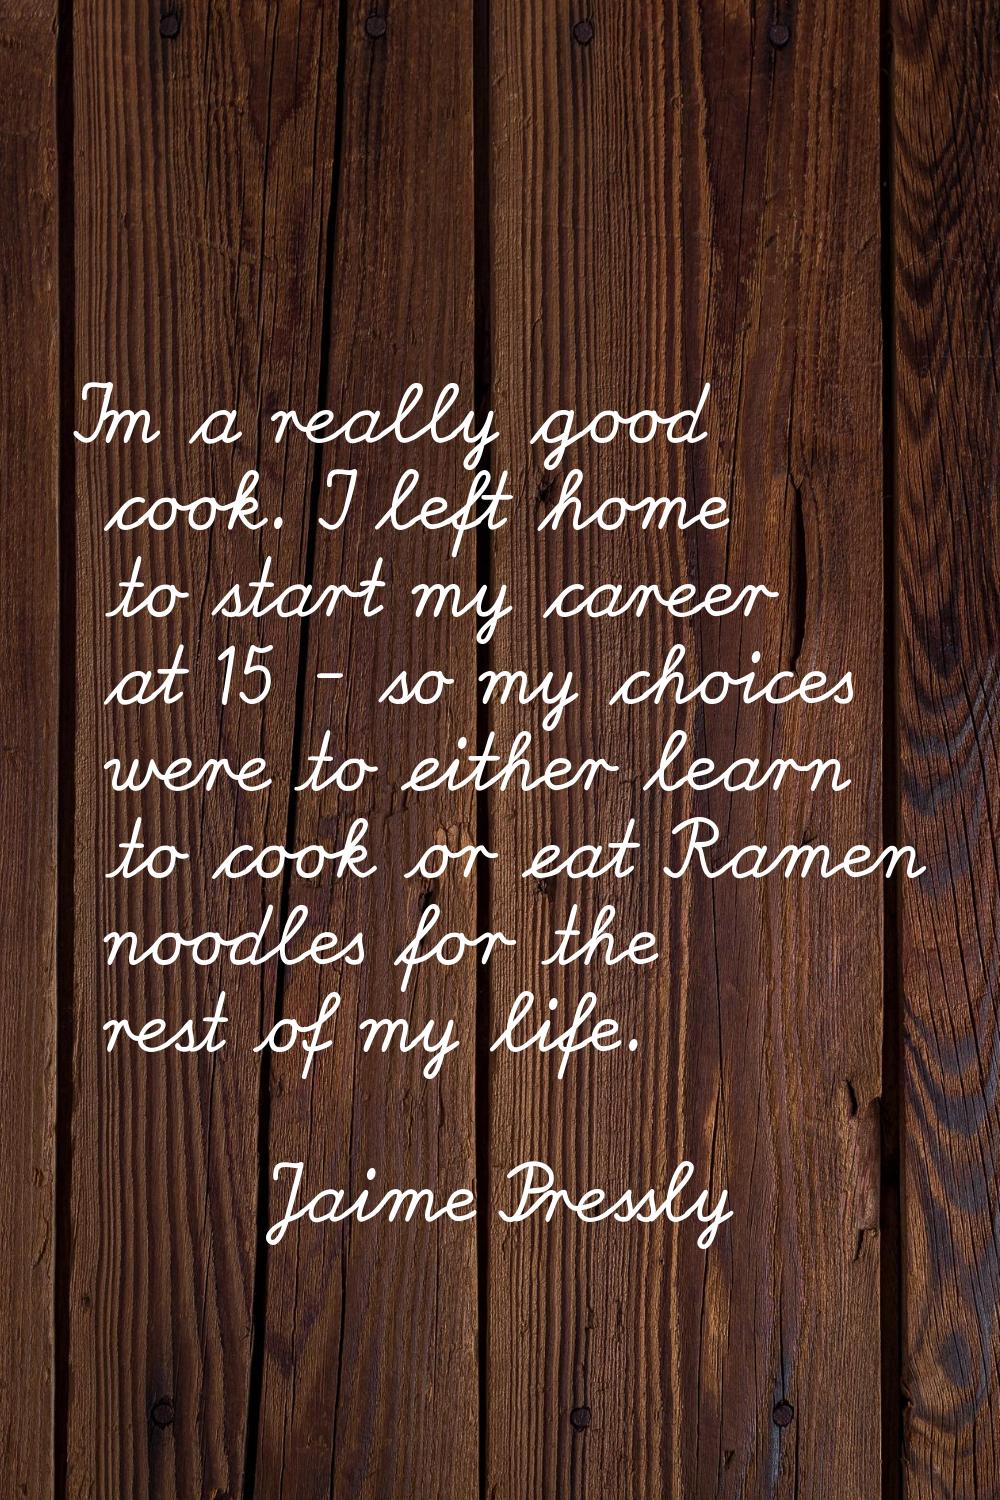 I'm a really good cook. I left home to start my career at 15 - so my choices were to either learn t